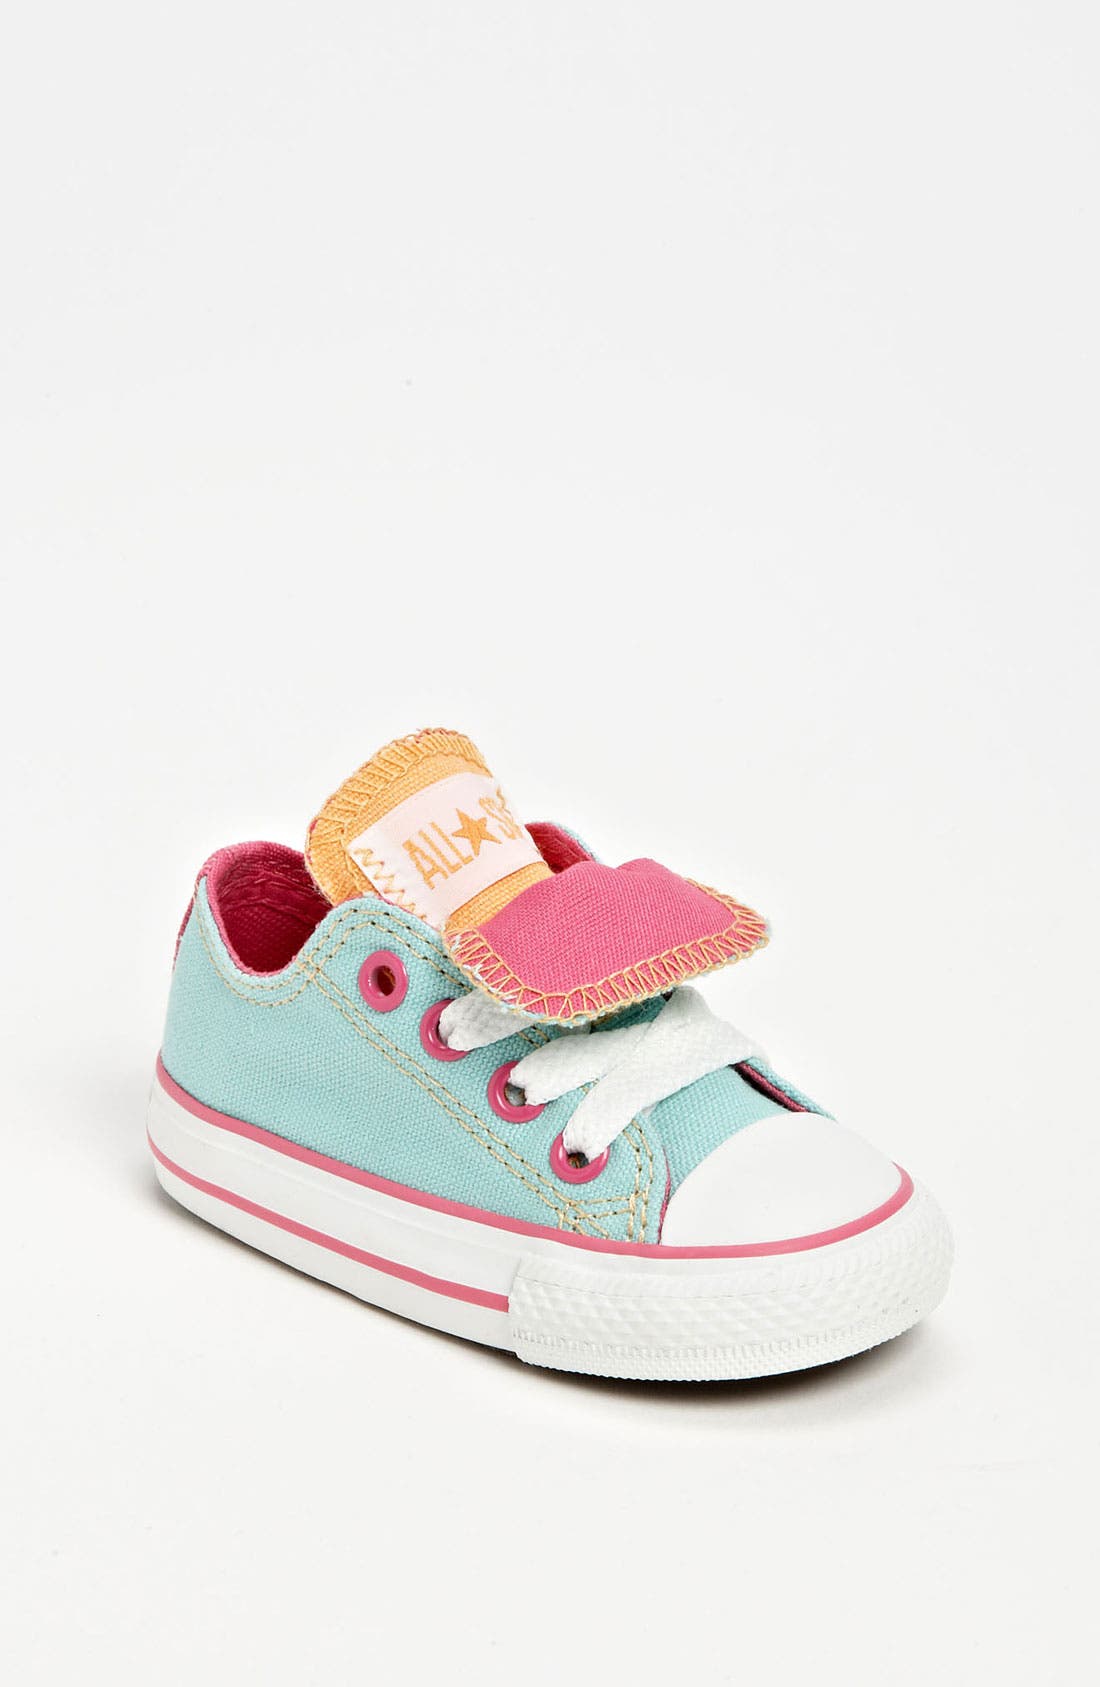 converse youth double tongue